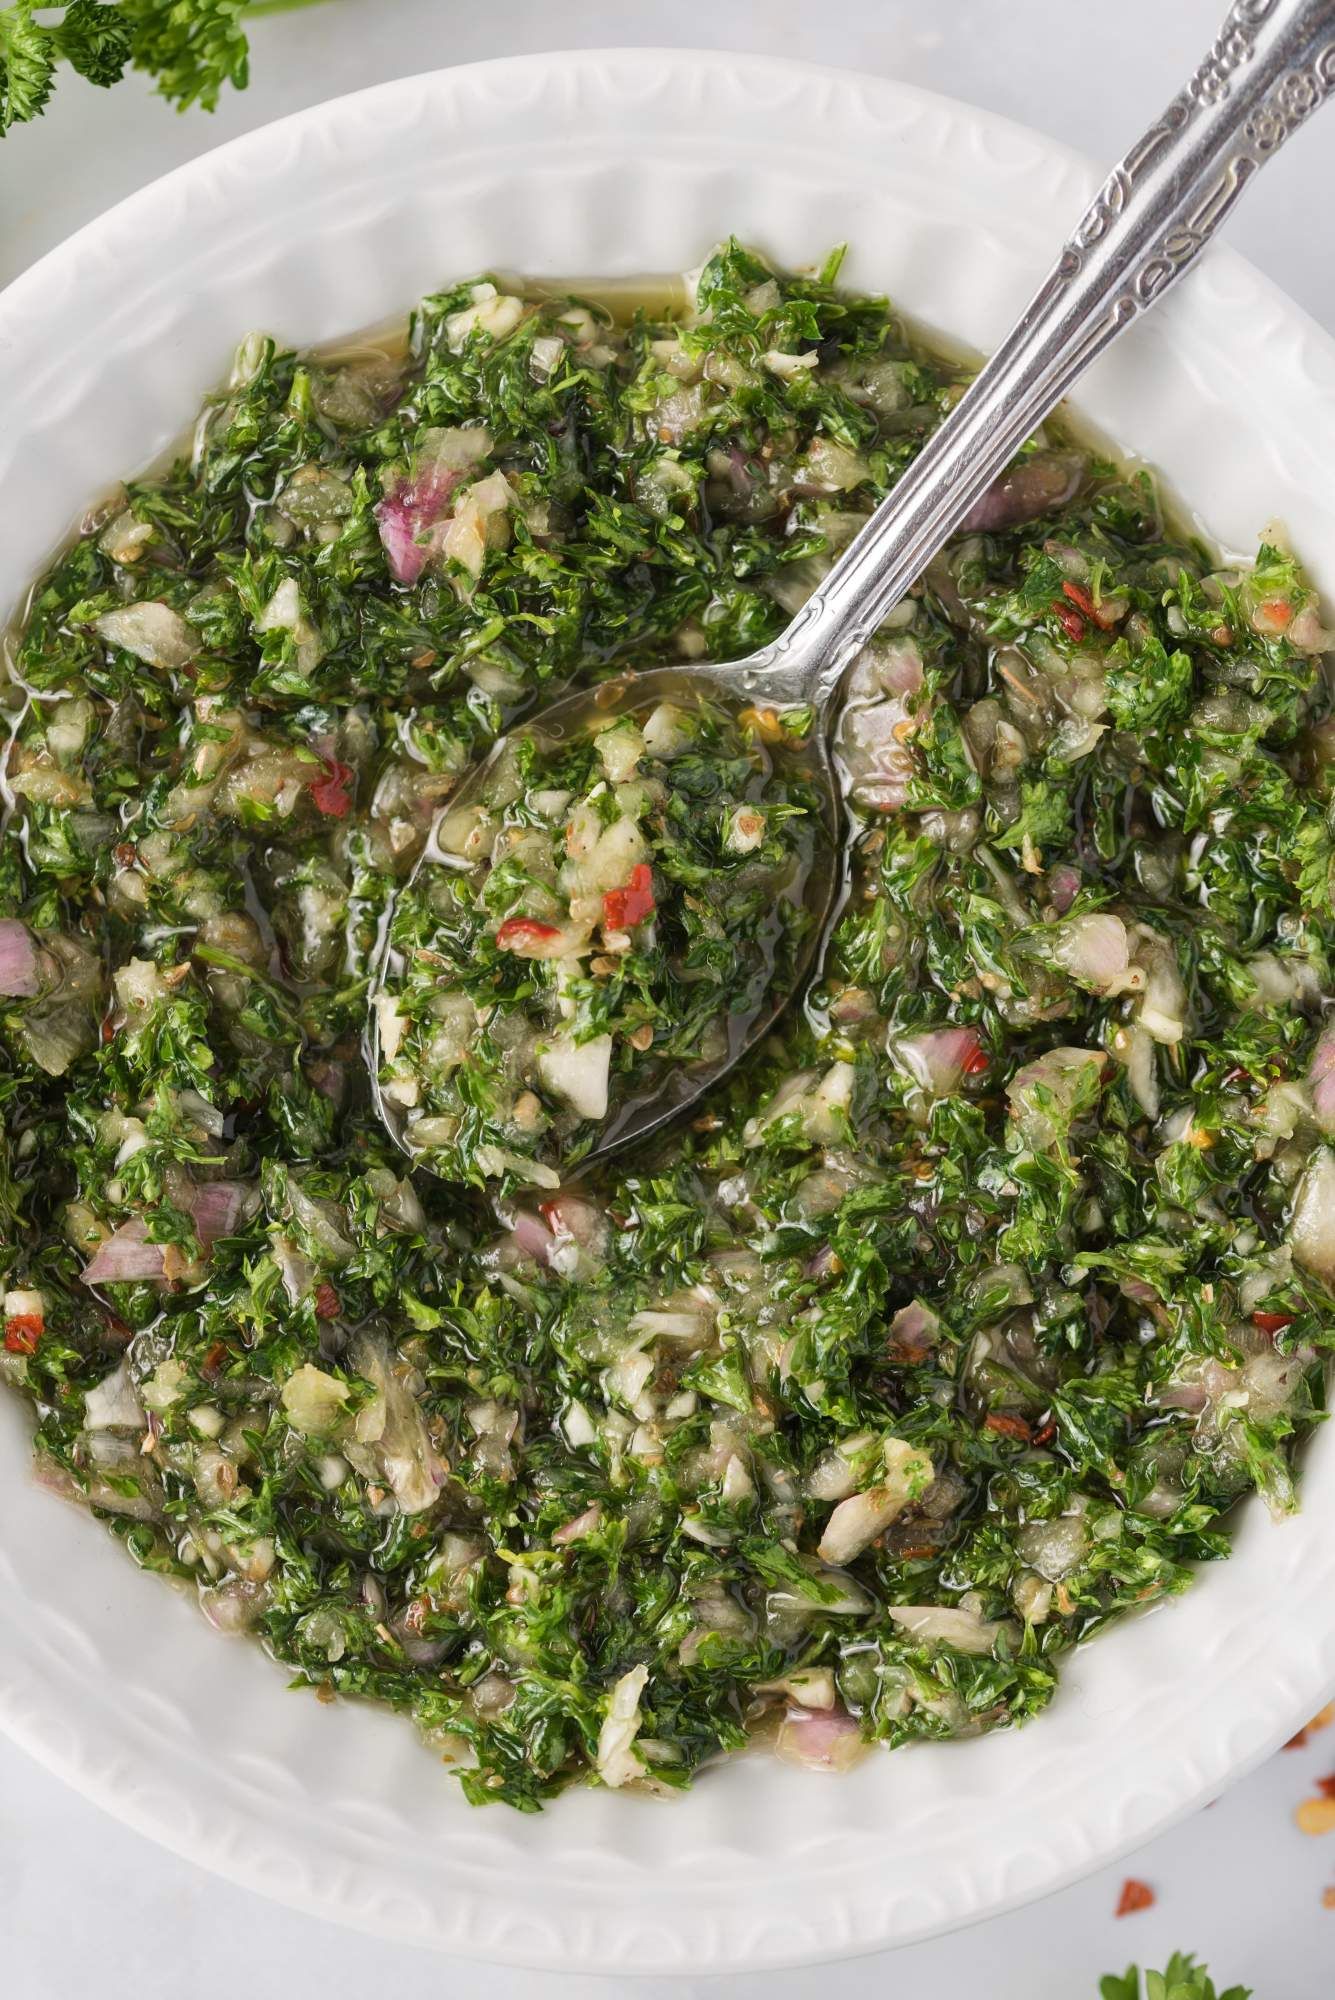 A white bowl filled with homemade chimichurri sauce including parsley, shallots, olive oil, vinegar, red pepper flakes, and salt.